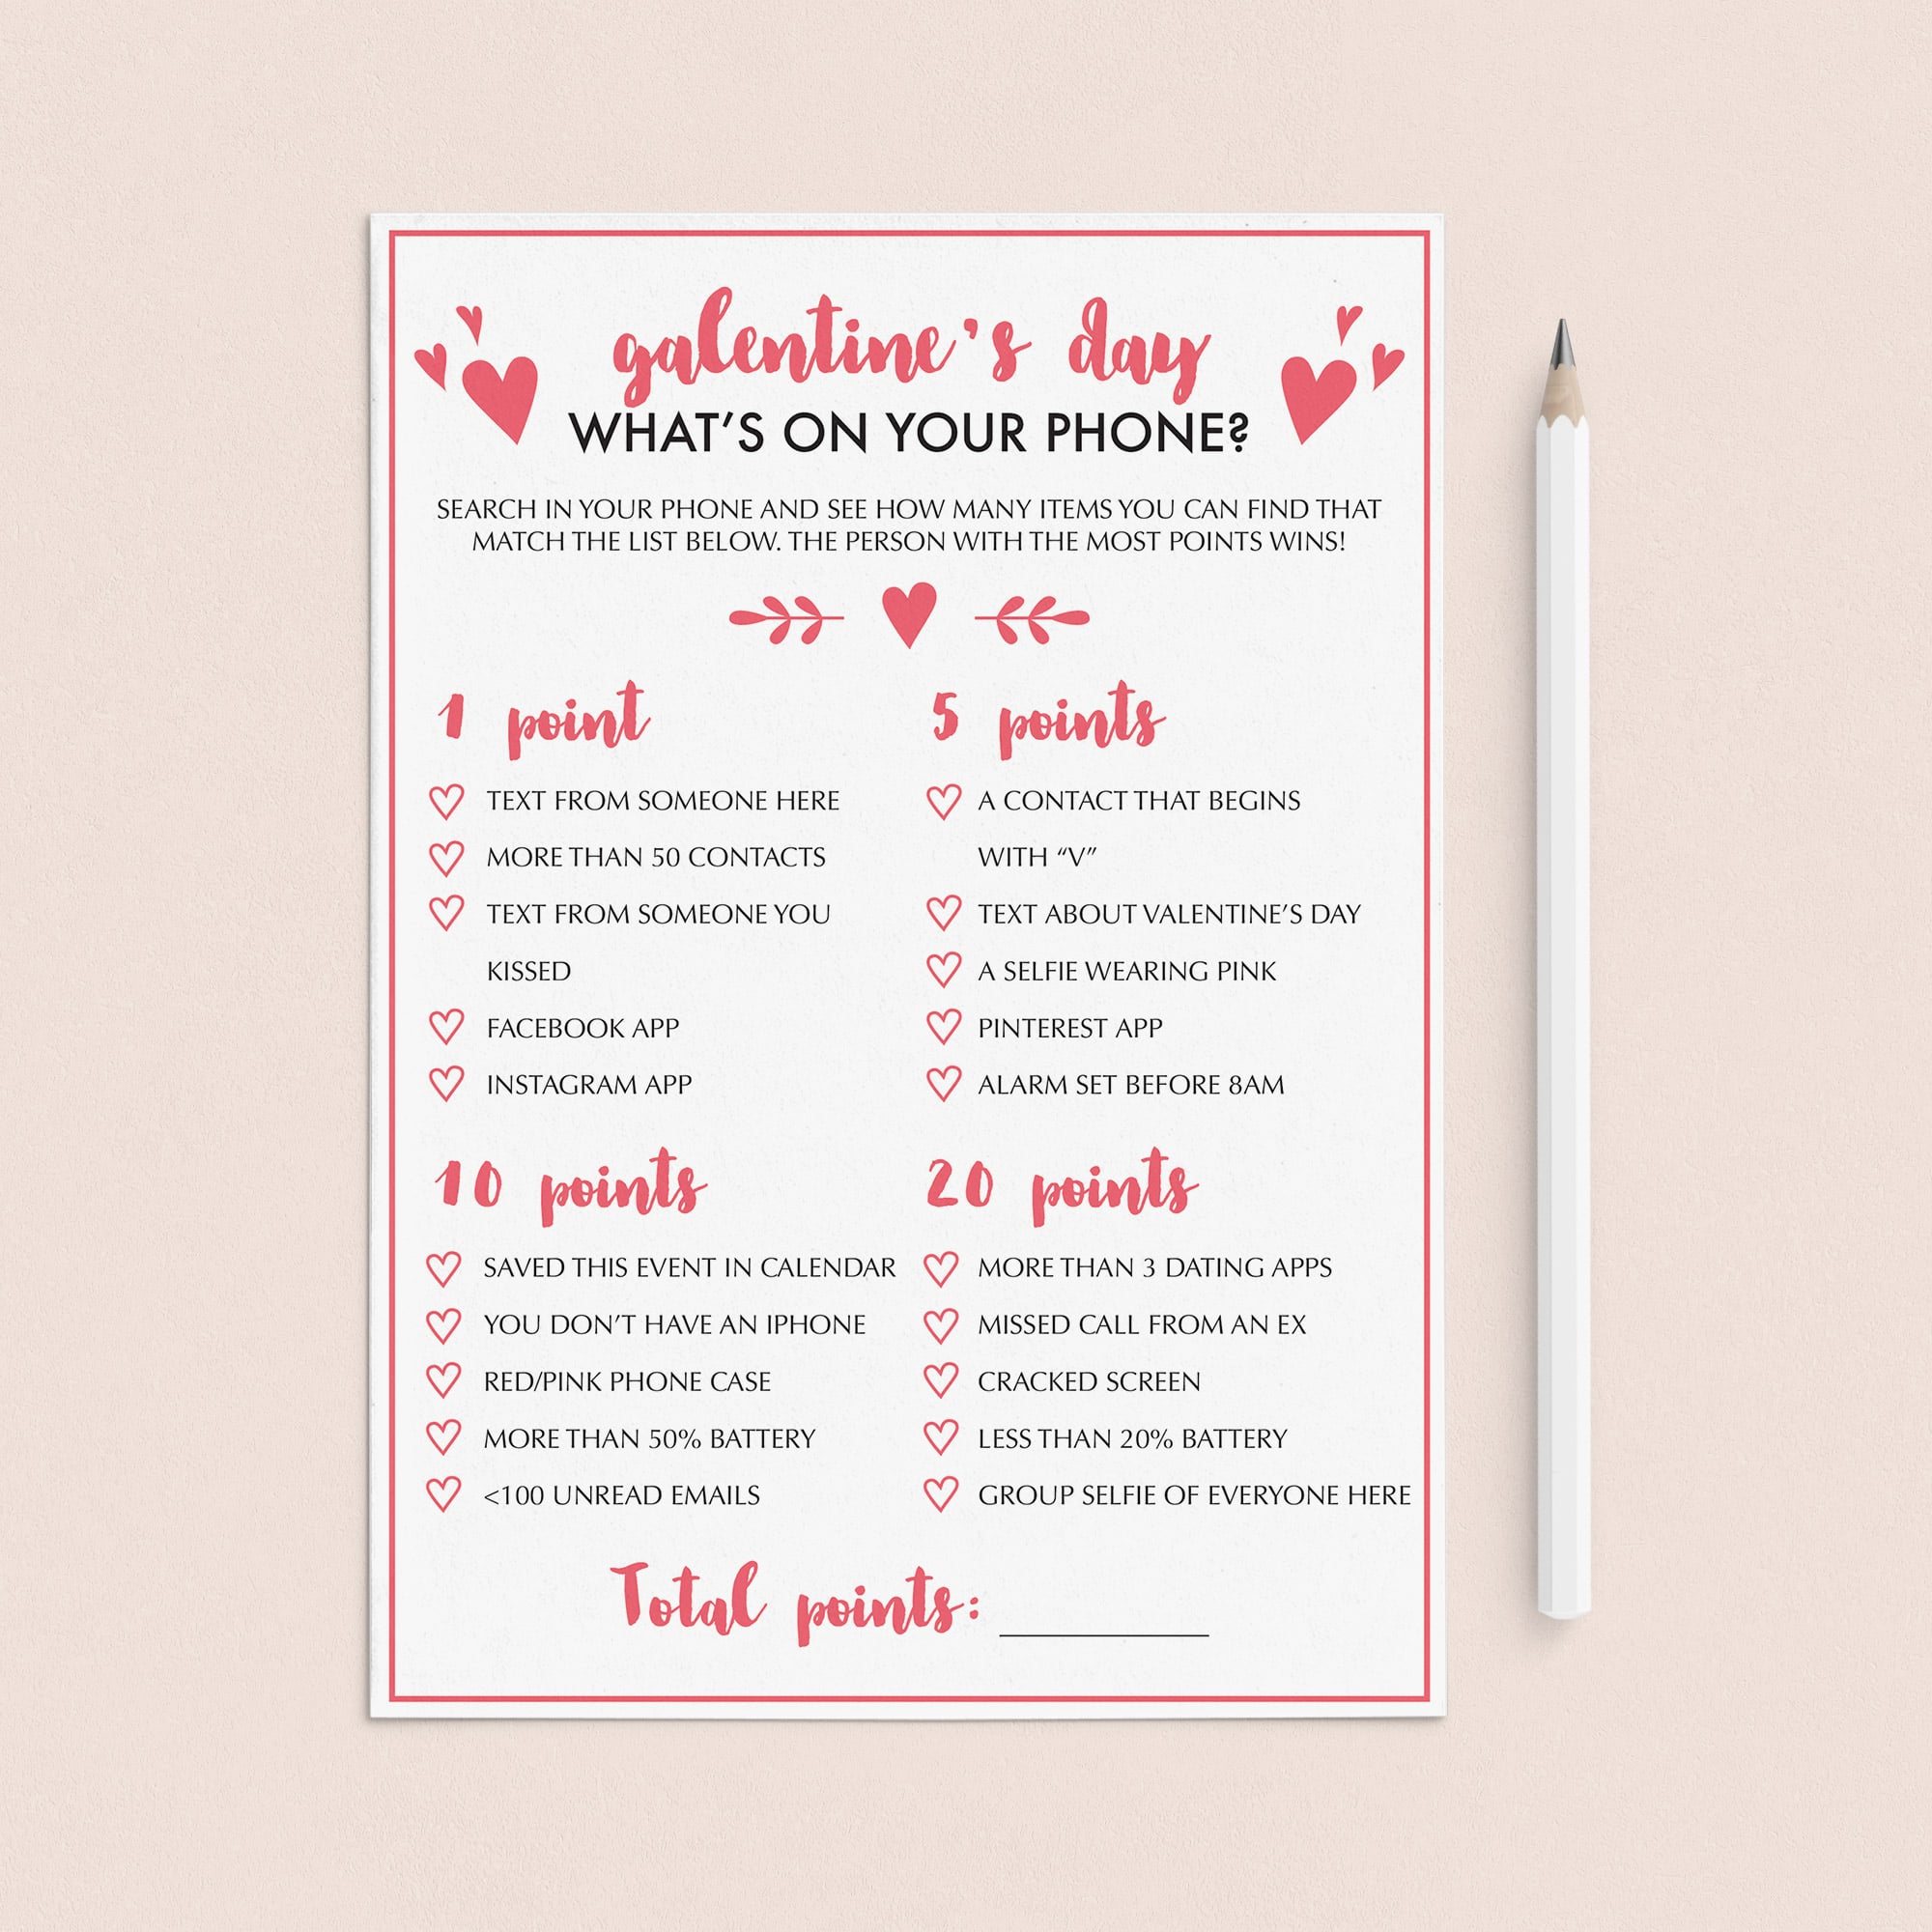 What's On Your Phone Game for Galentine's Day Party by LittleSizzle